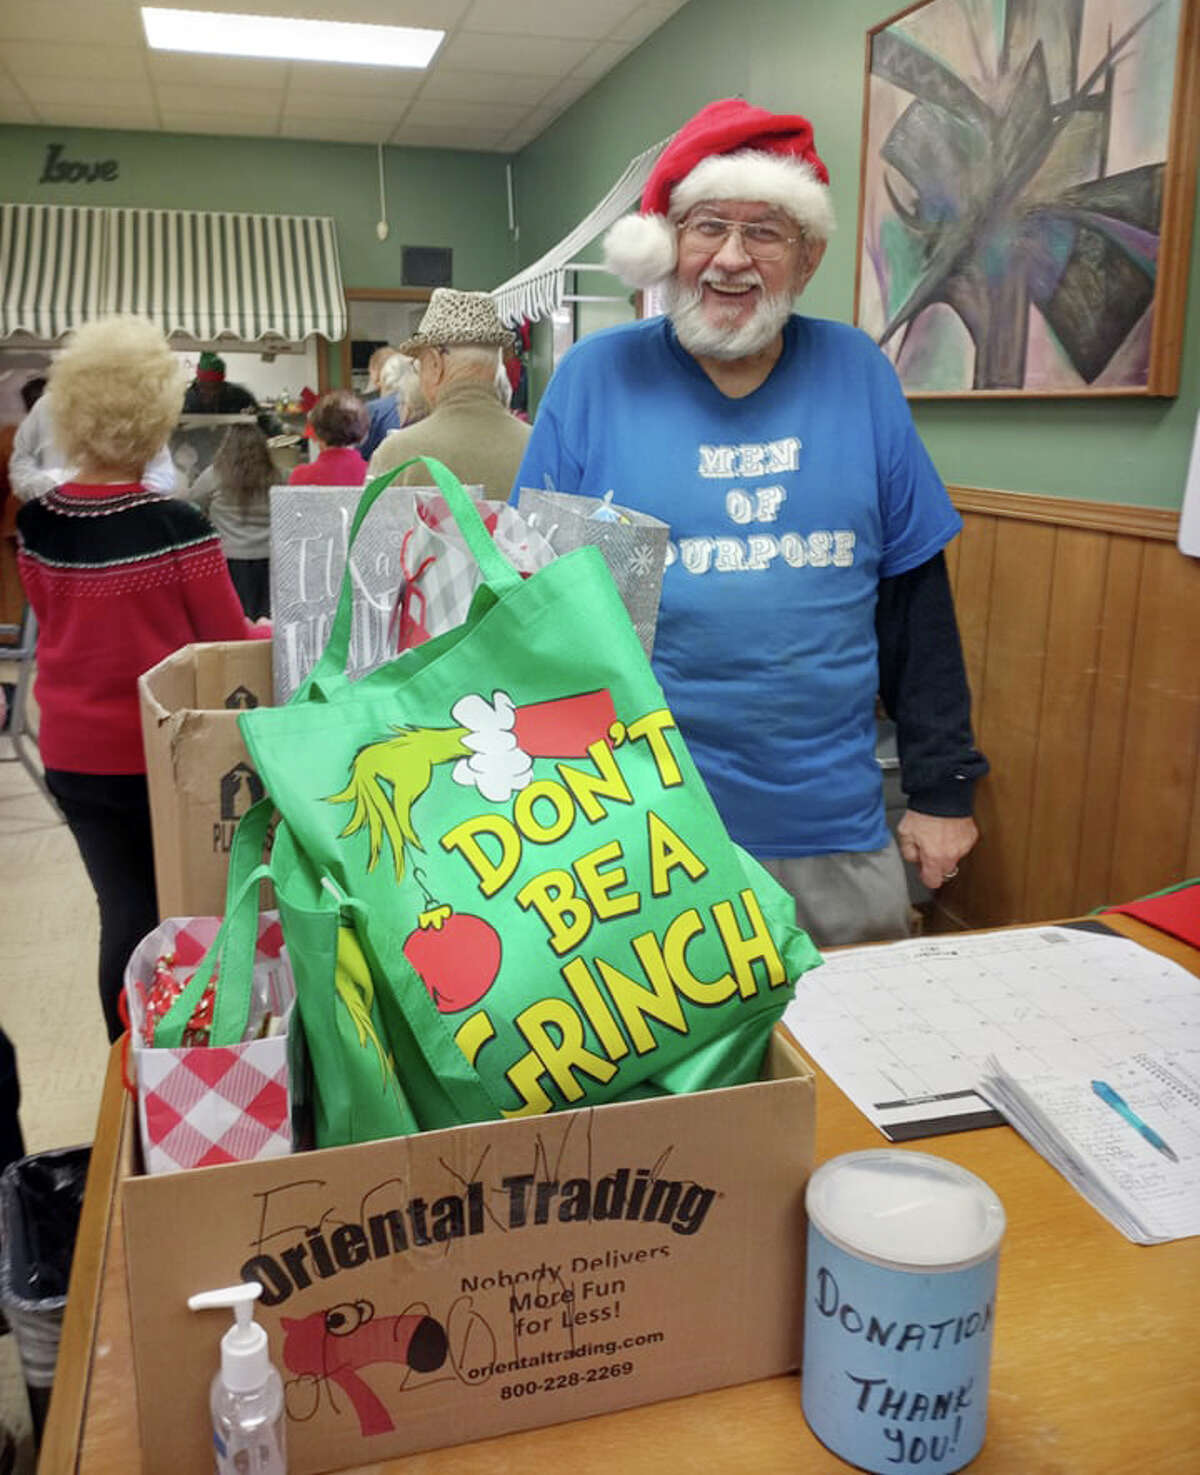 Volunteer Bill Bomar enjoys serving at the event, and pointed to gifts for children to receive on Christmas. 